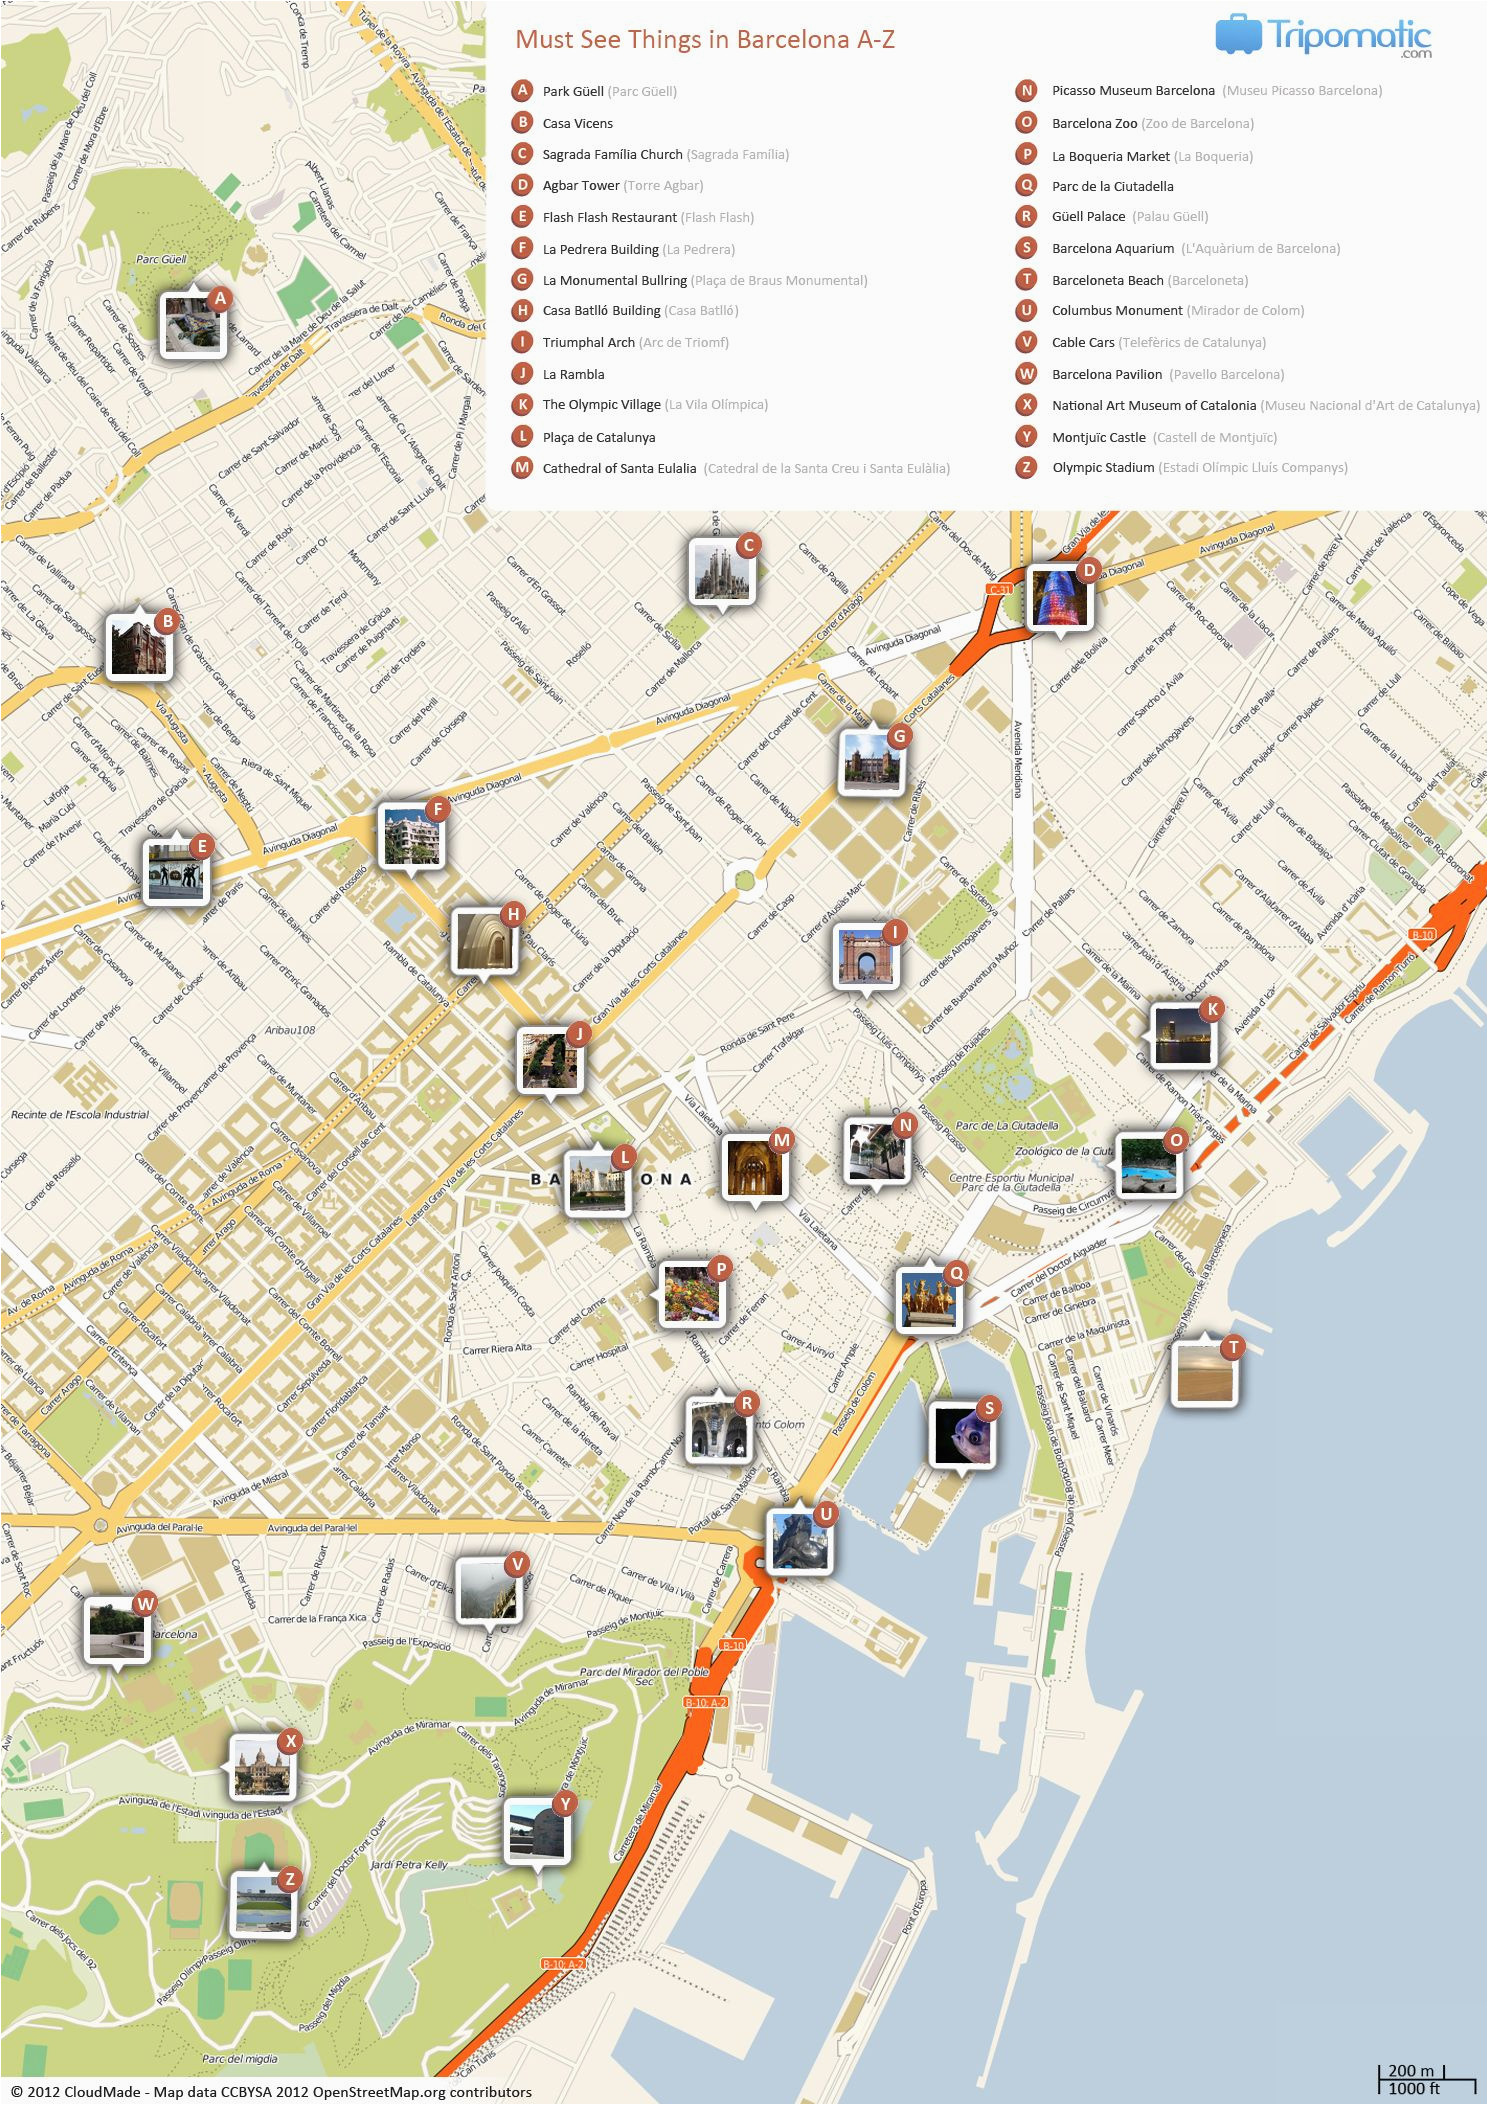 what to see in barcelona adventures a a barcelona tourist map